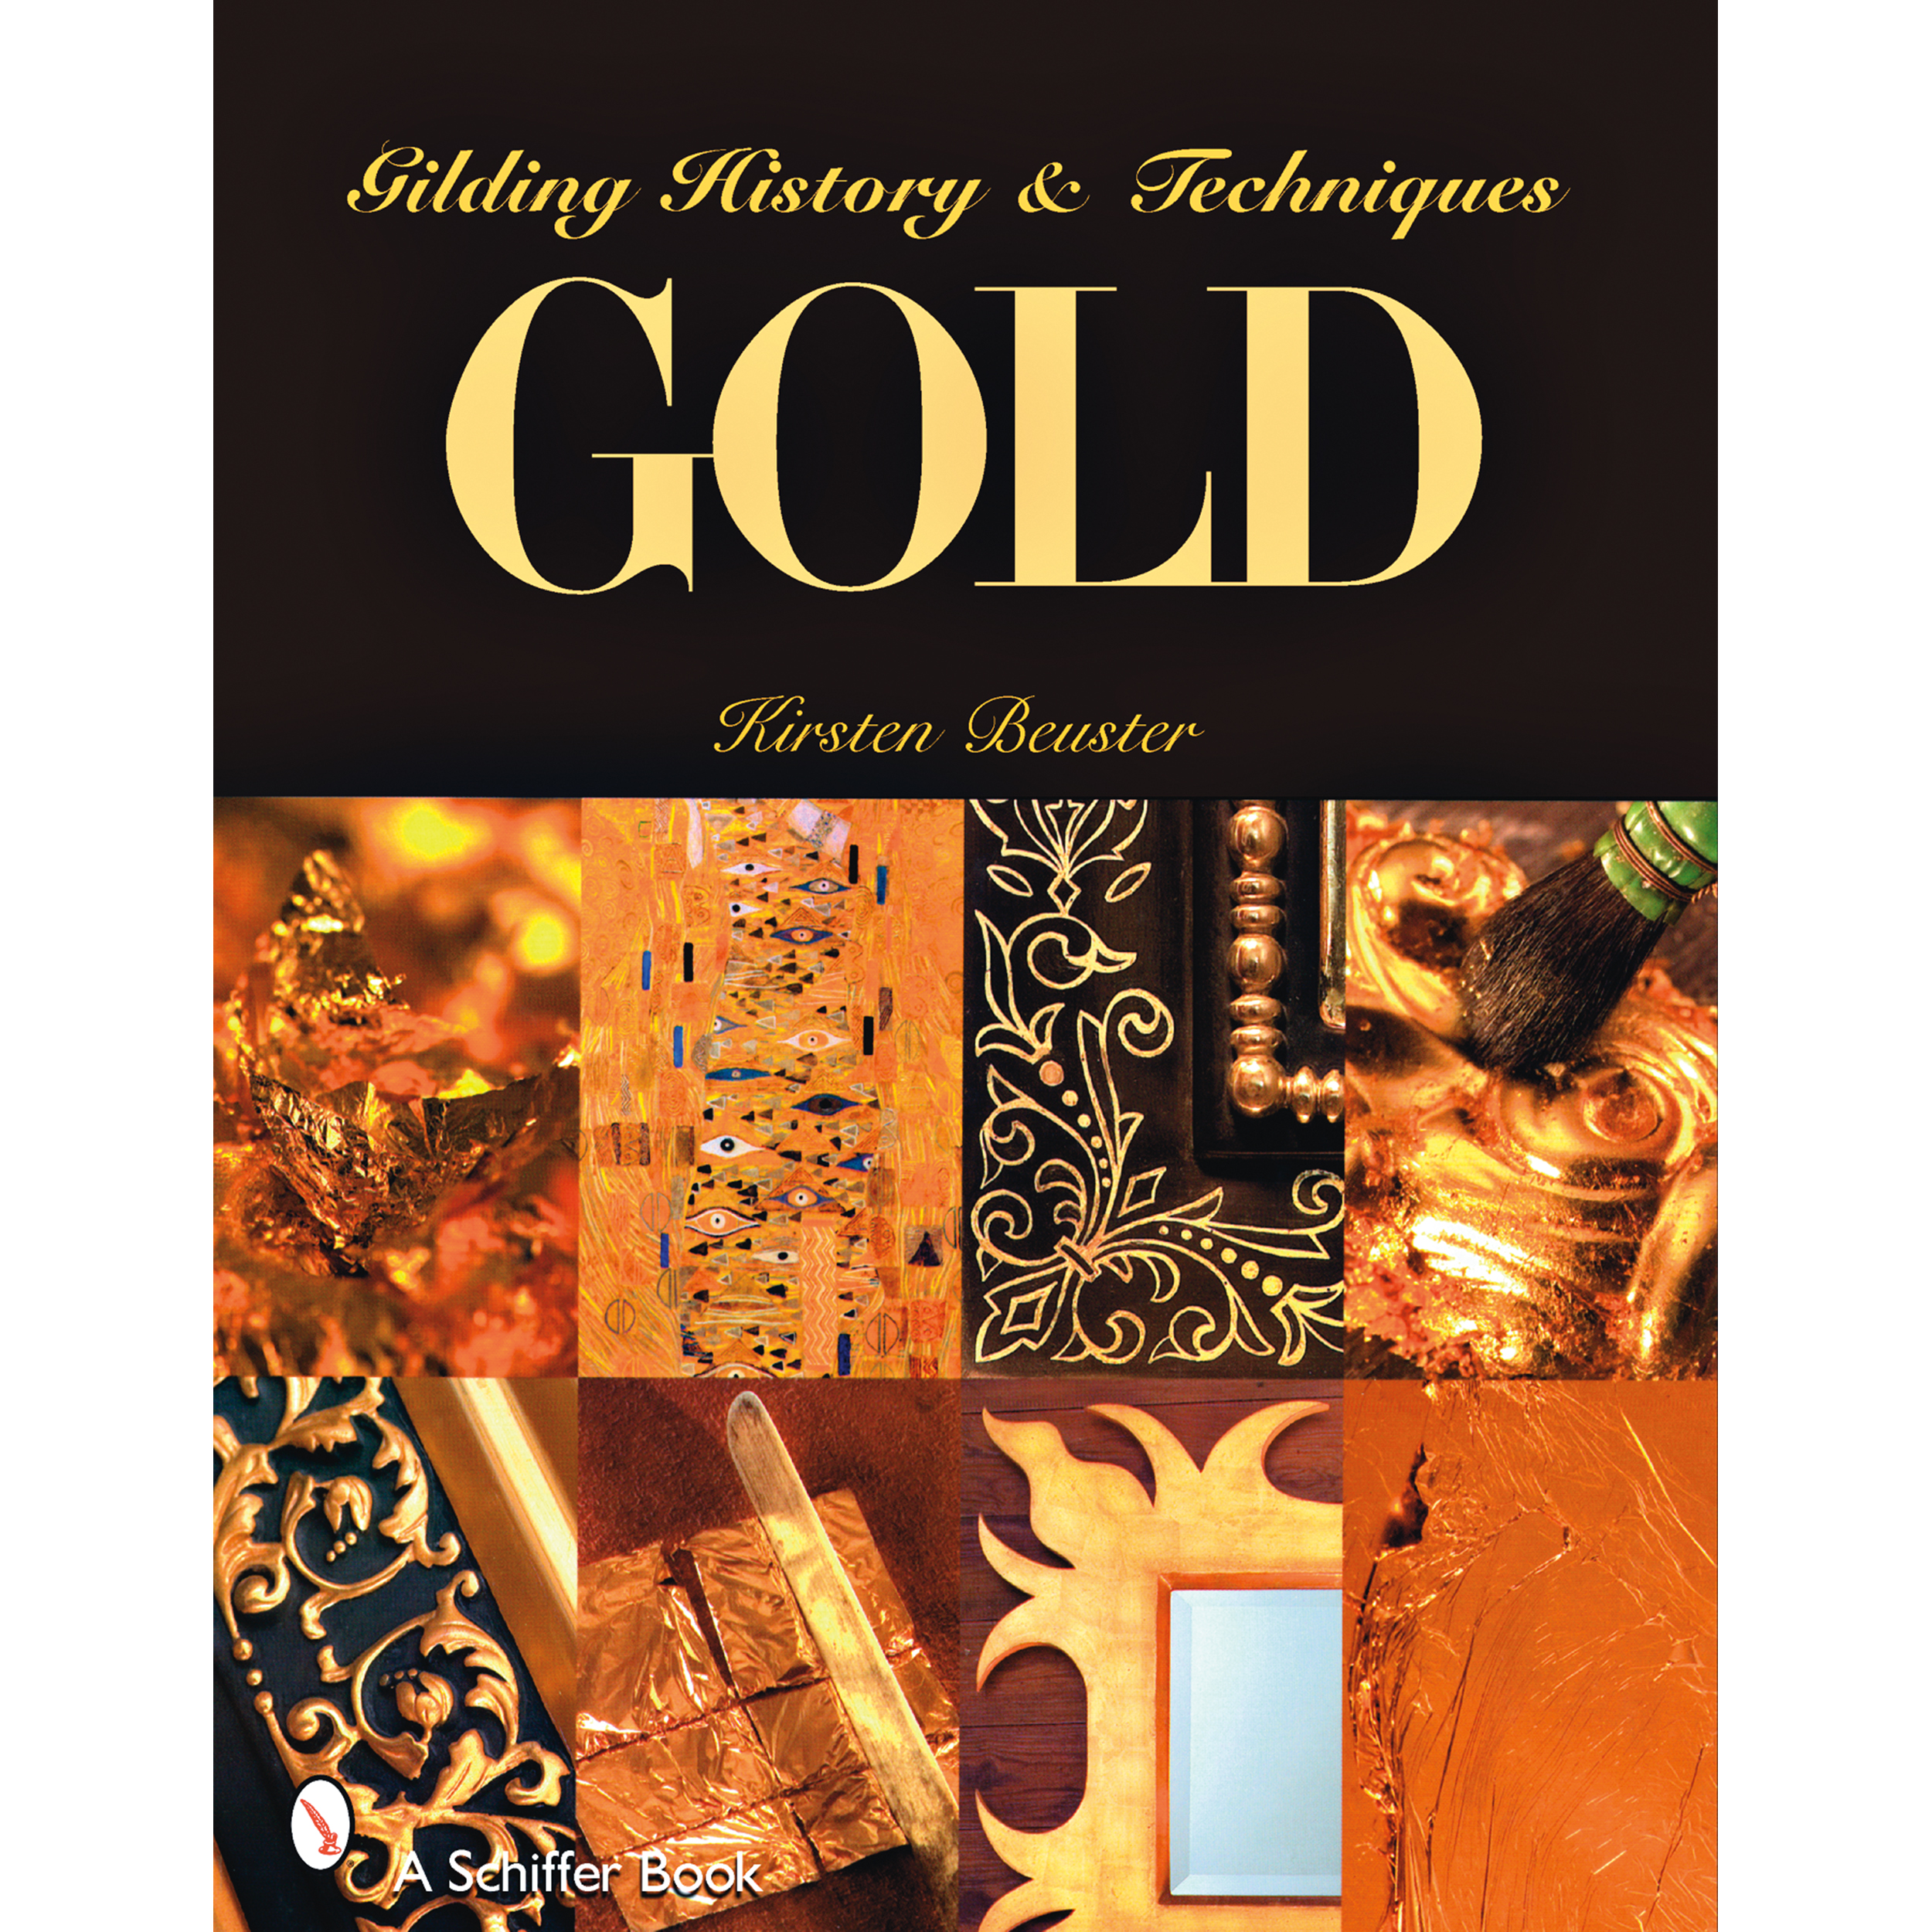 Gold: Gilding History And Techniques